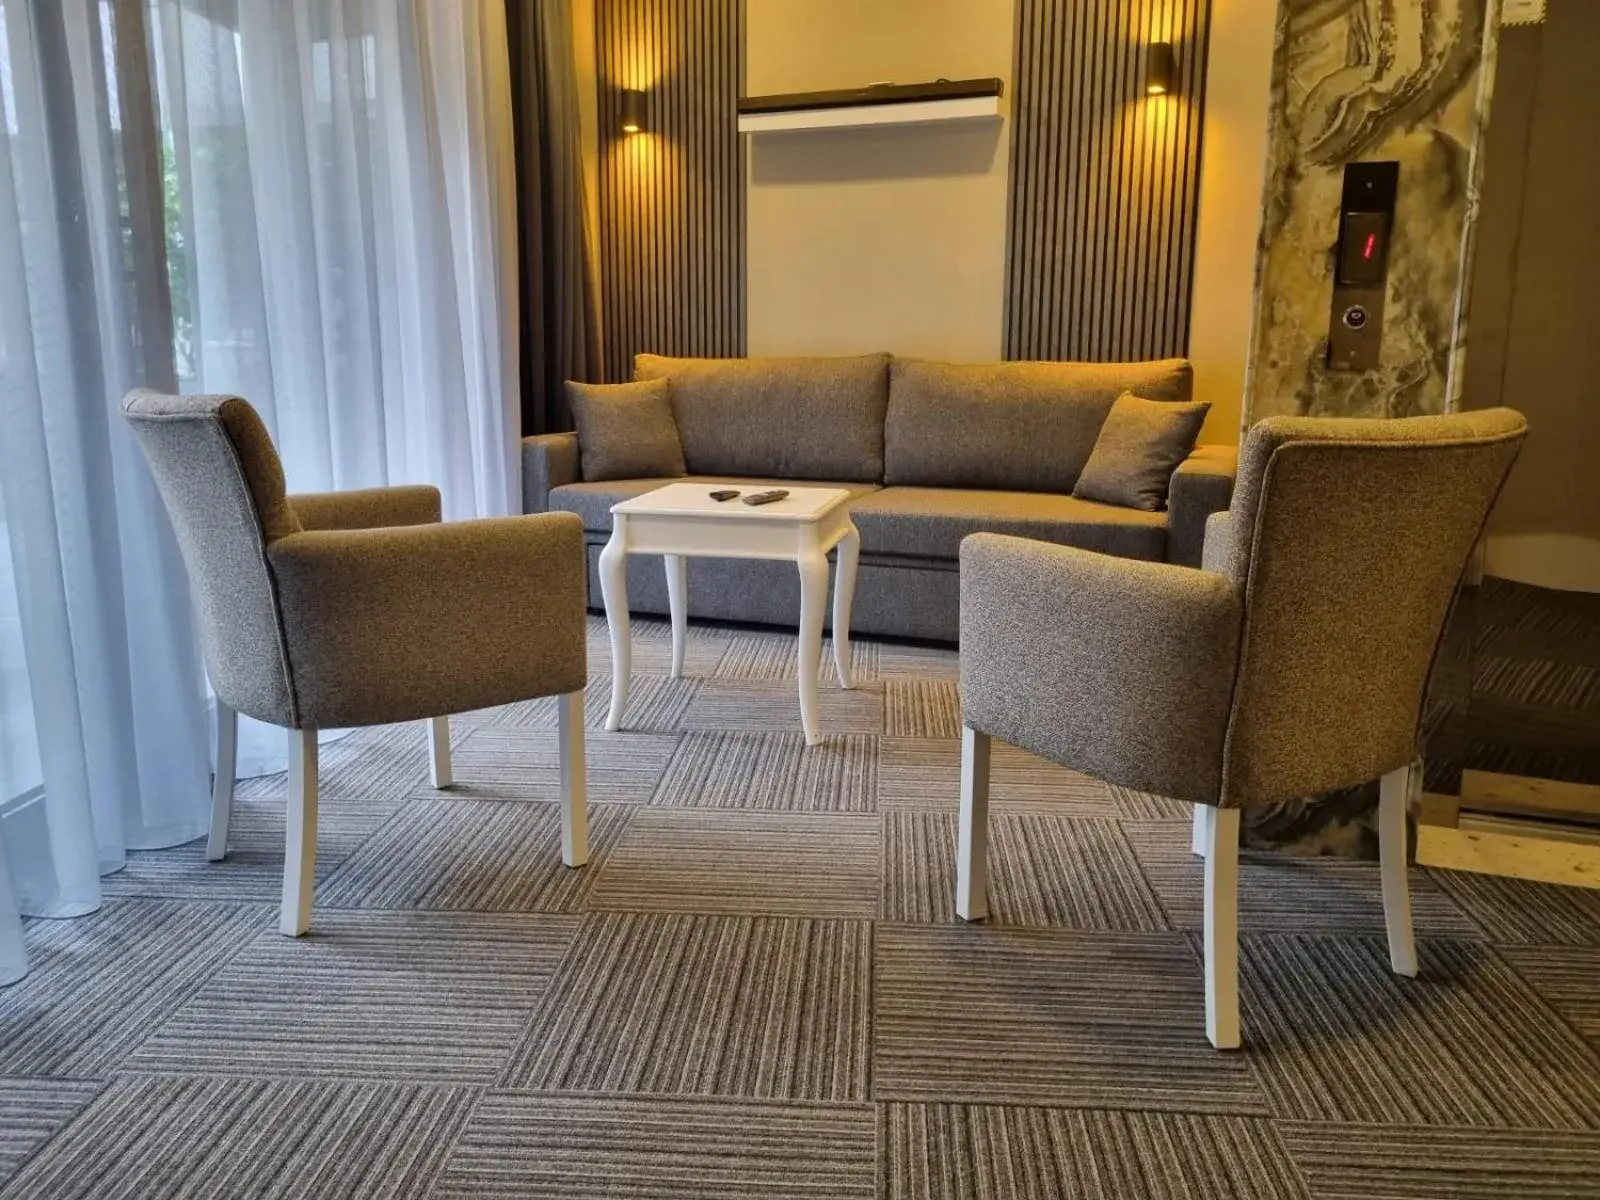 Seating Area in Mia Berre Hotels